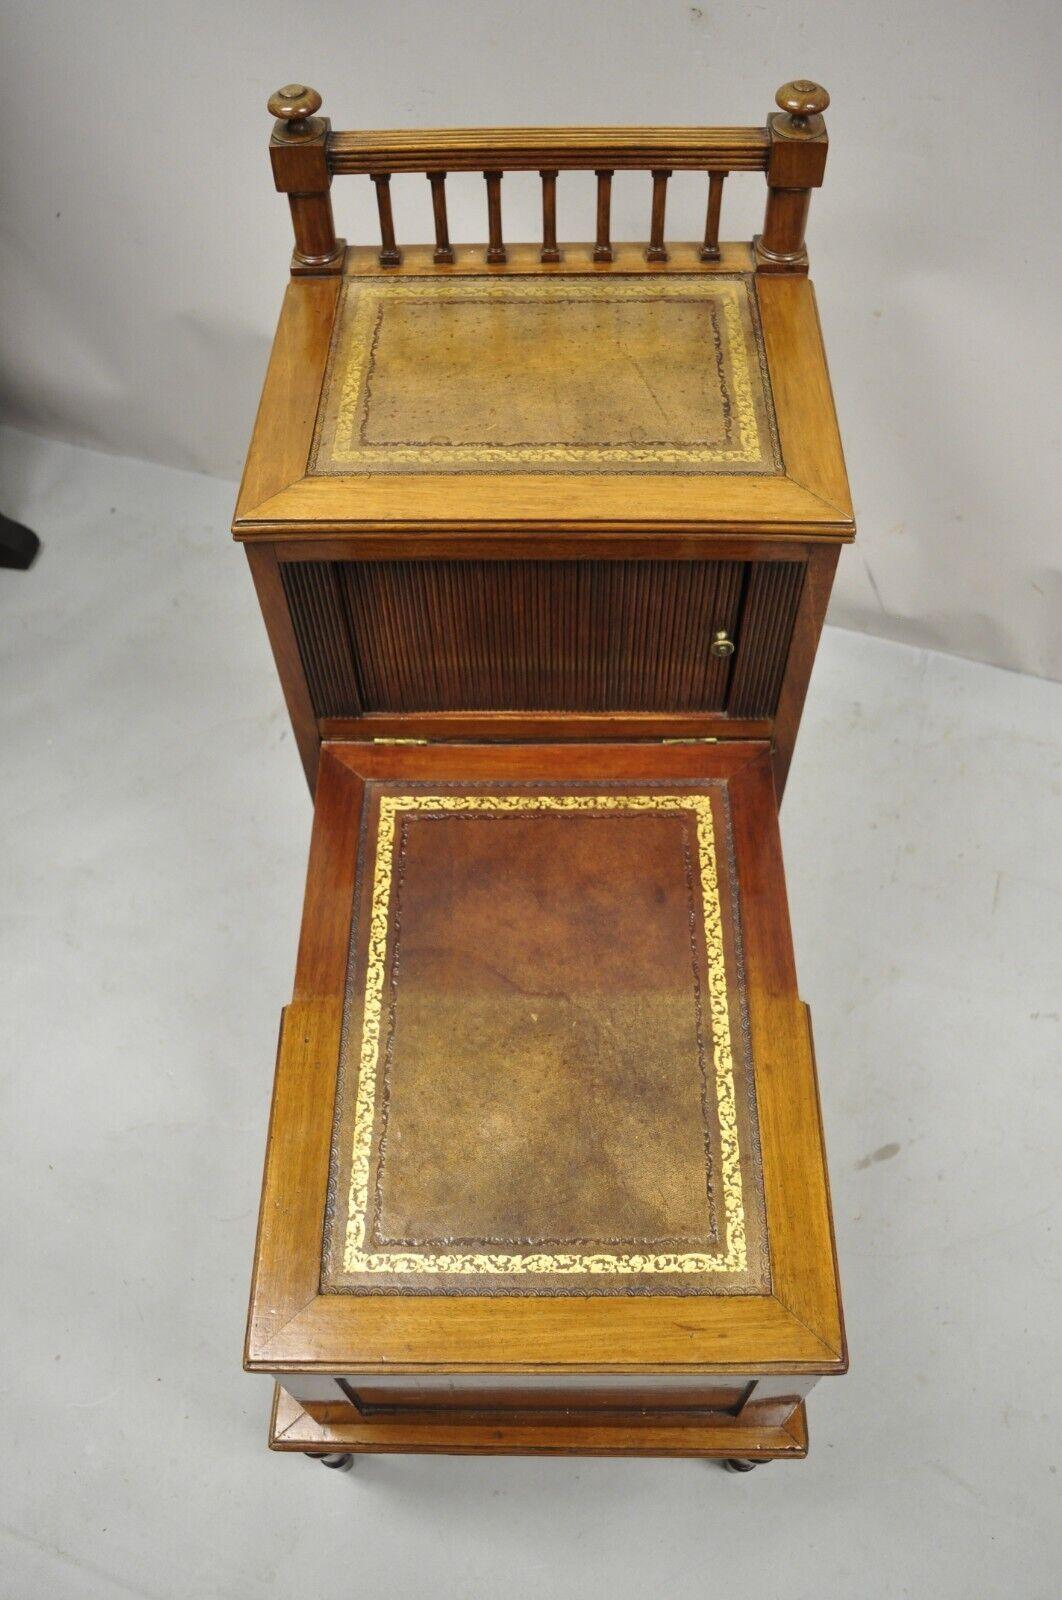 Antique English Regency Leather Top 3 Tier Side Table with Hidden Storage For Sale 1